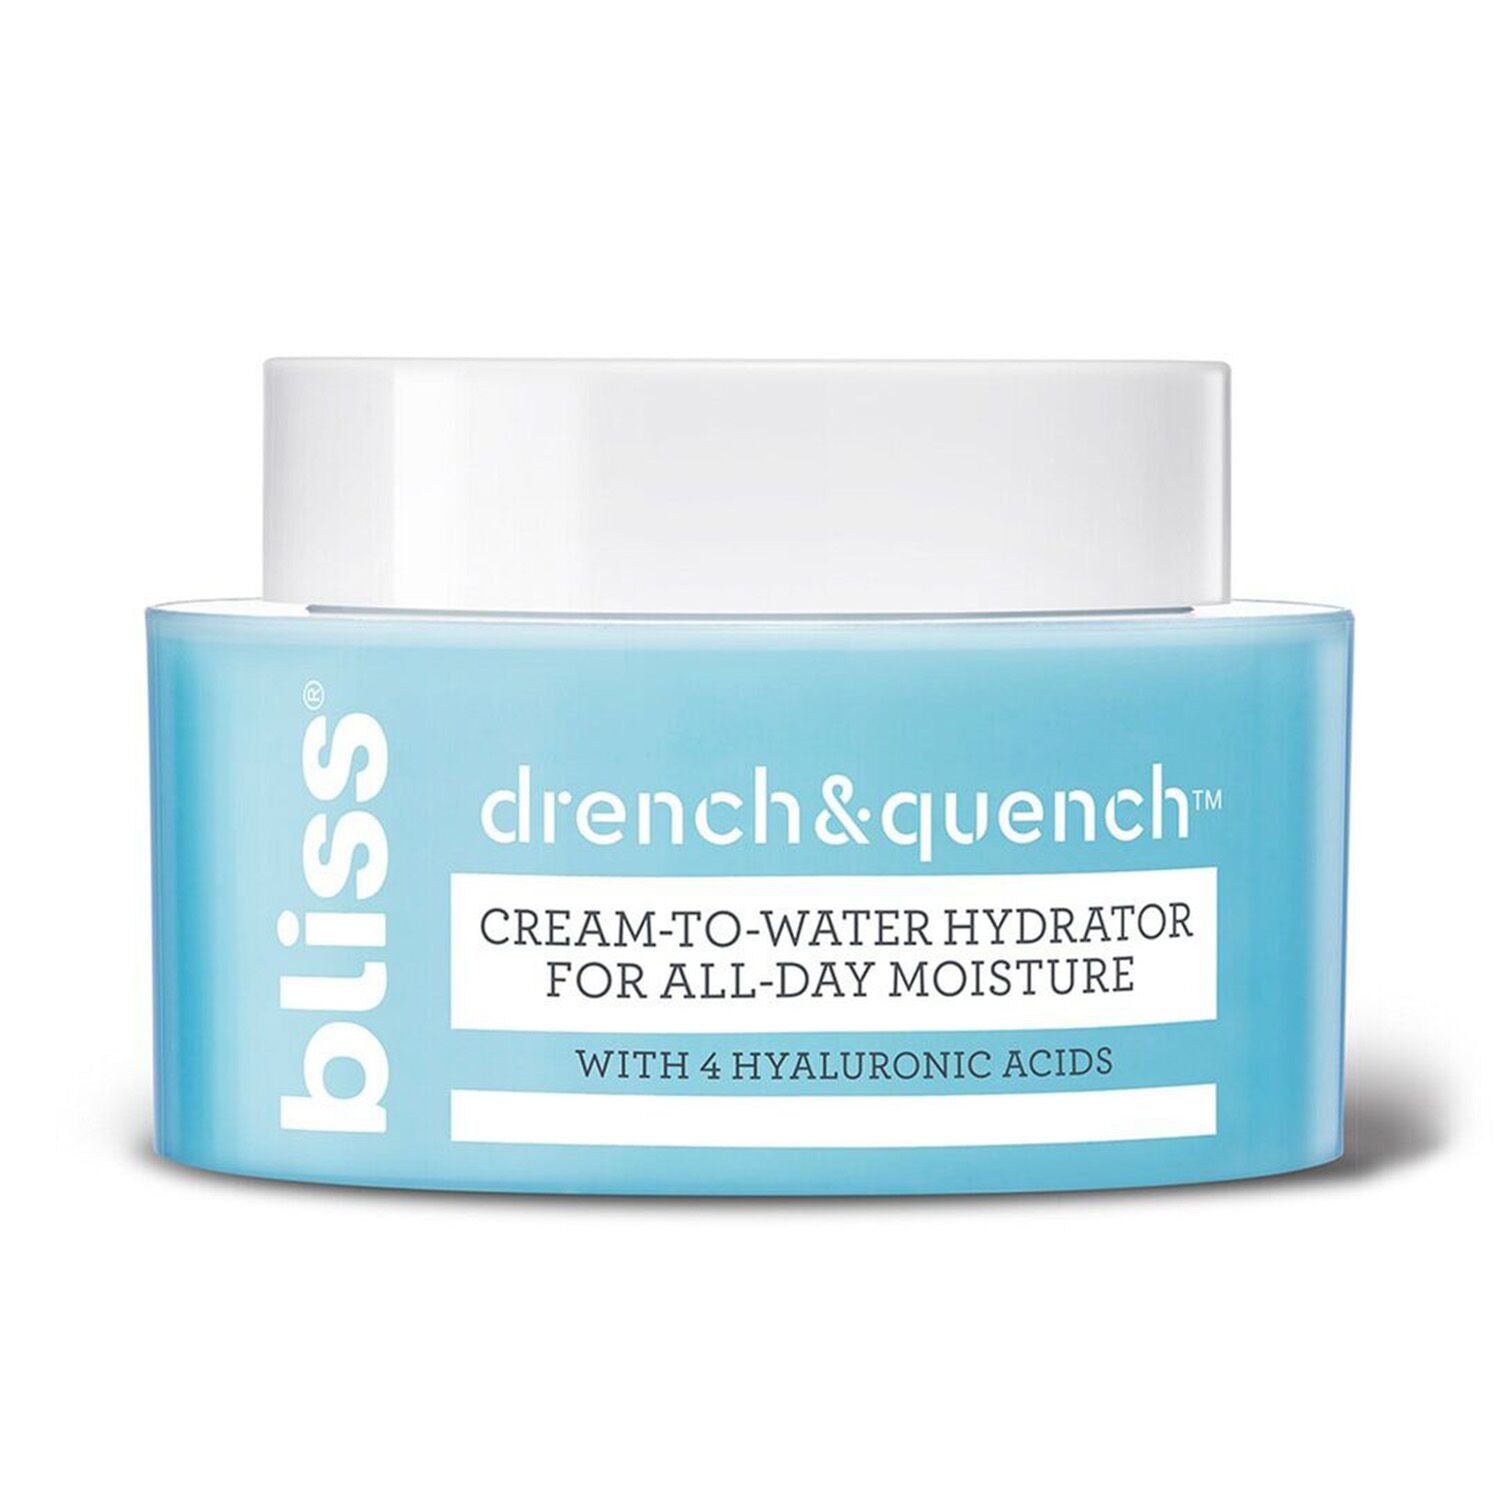 Bliss Drench & Quench Moisturizer mini